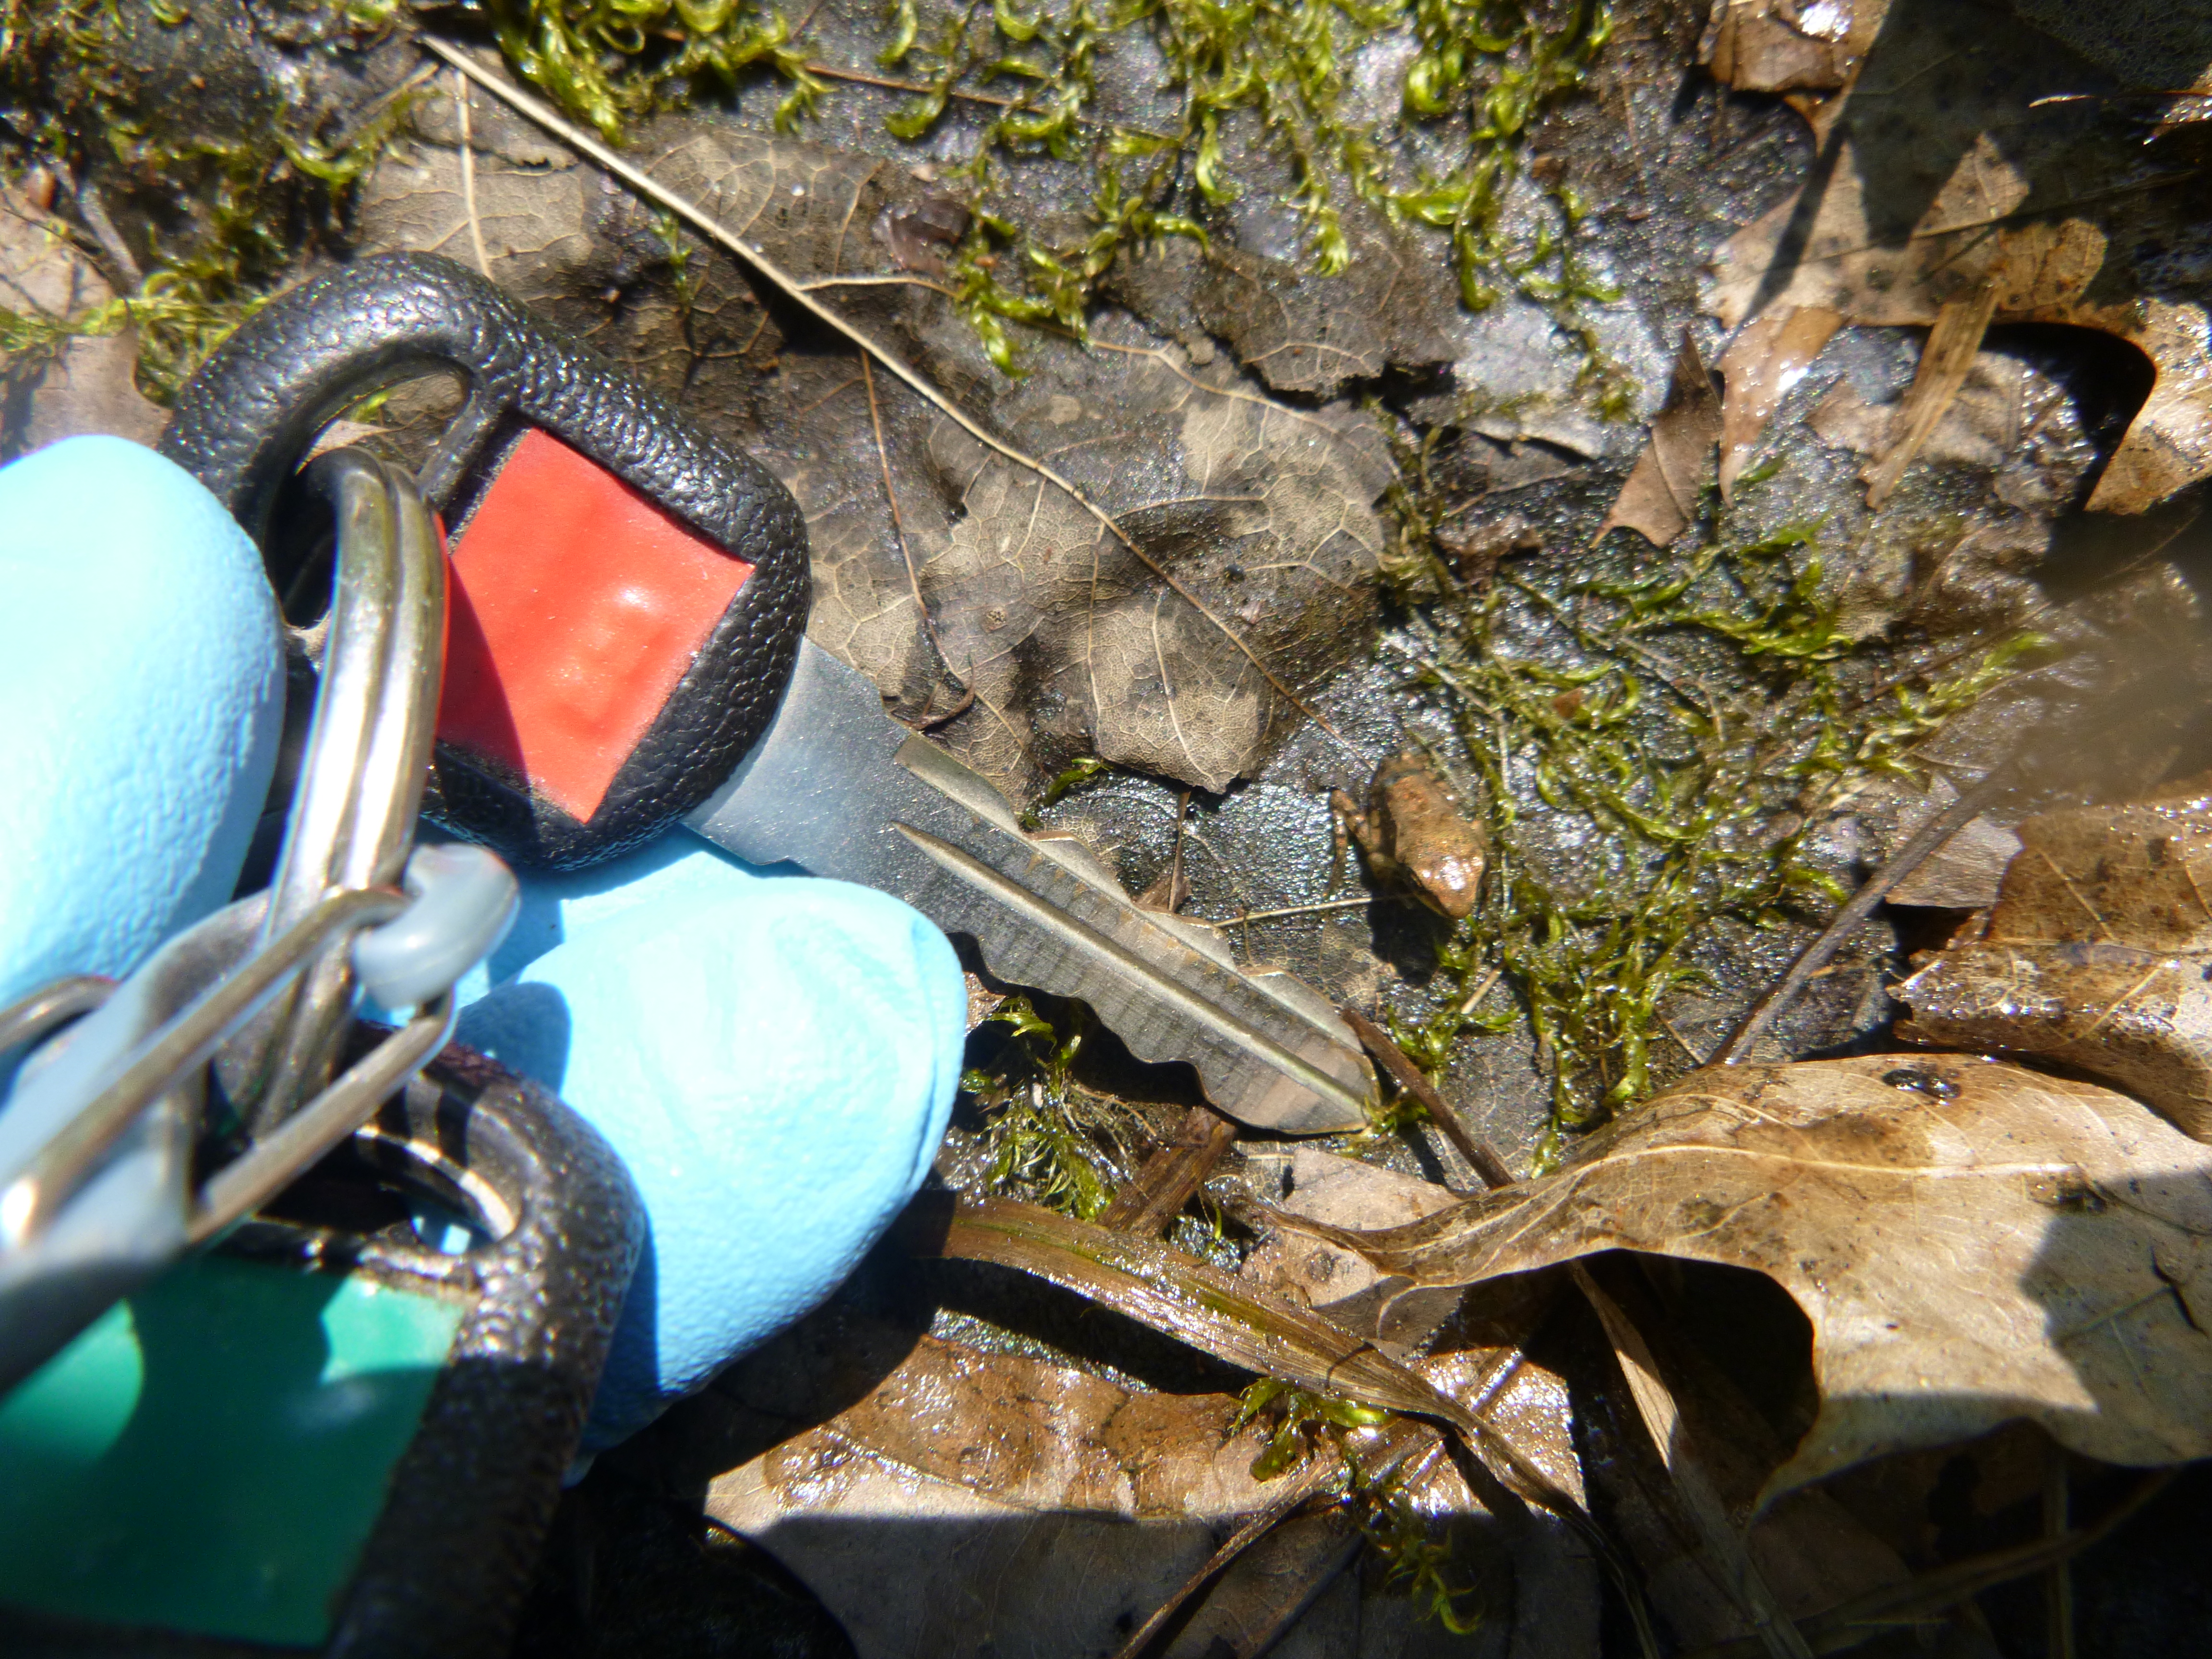 A newly emerged wood frog begins its journey into the forest (car key for scale).